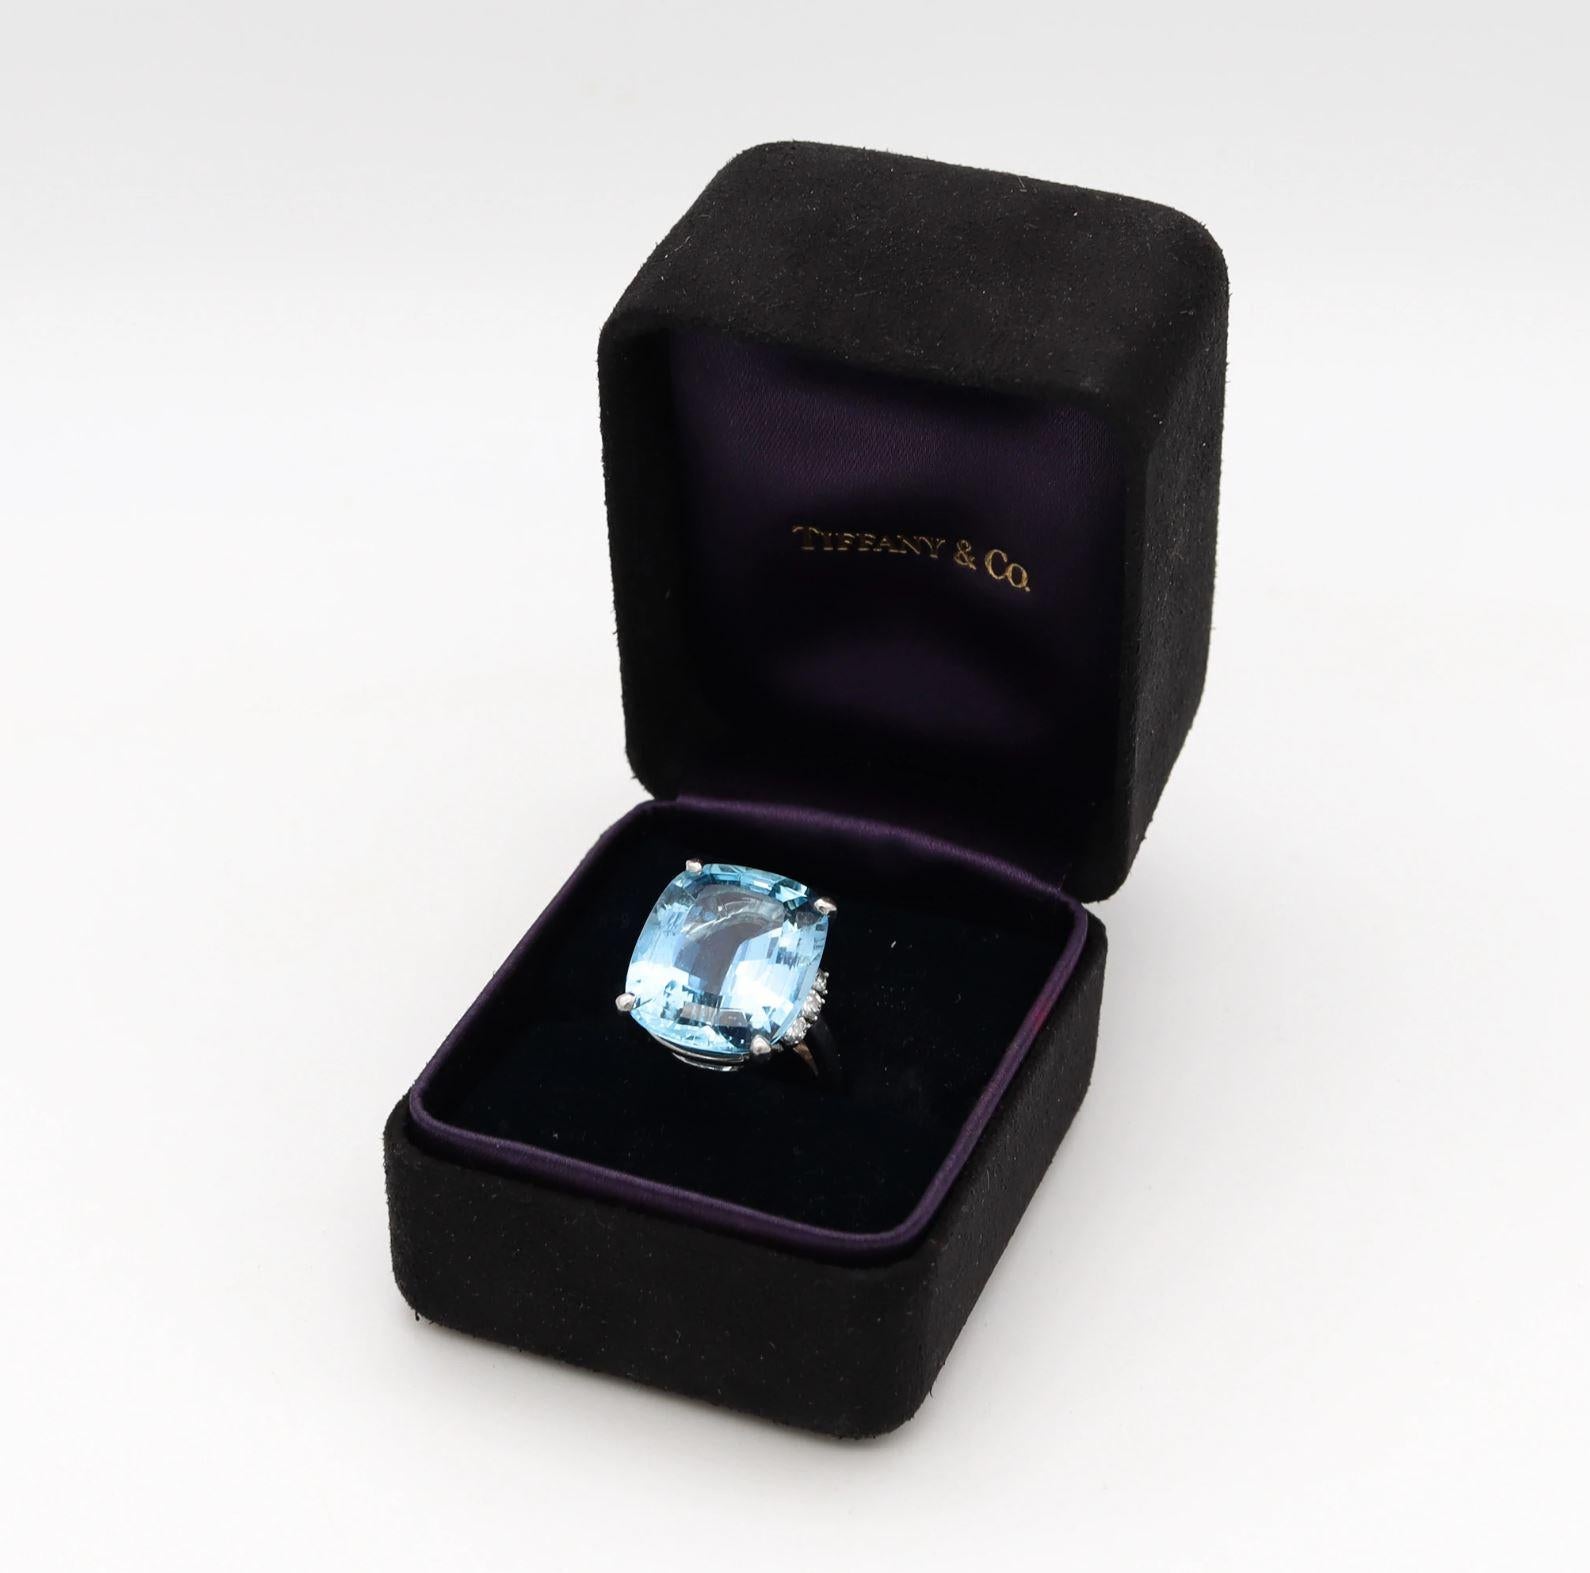 Tiffany & Co. GIA Certified 1960 Cocktail Ring Platinum with 19.17 Ct Aquamarine 4